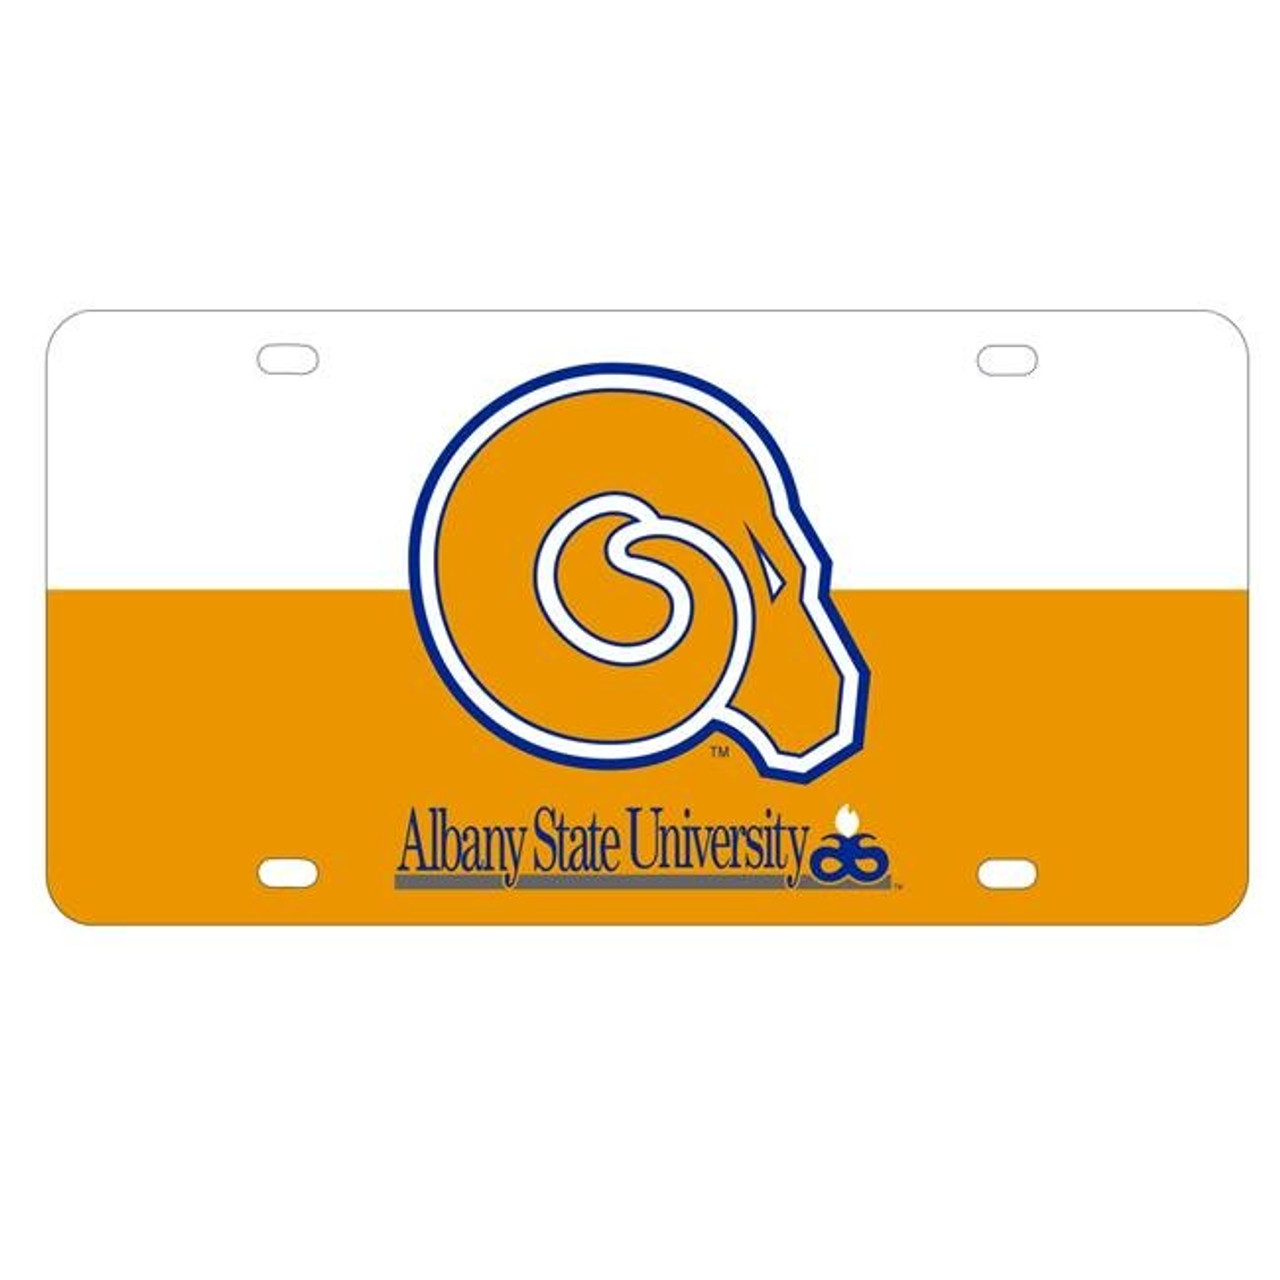 Albany State University Metal License Plate Car Tag